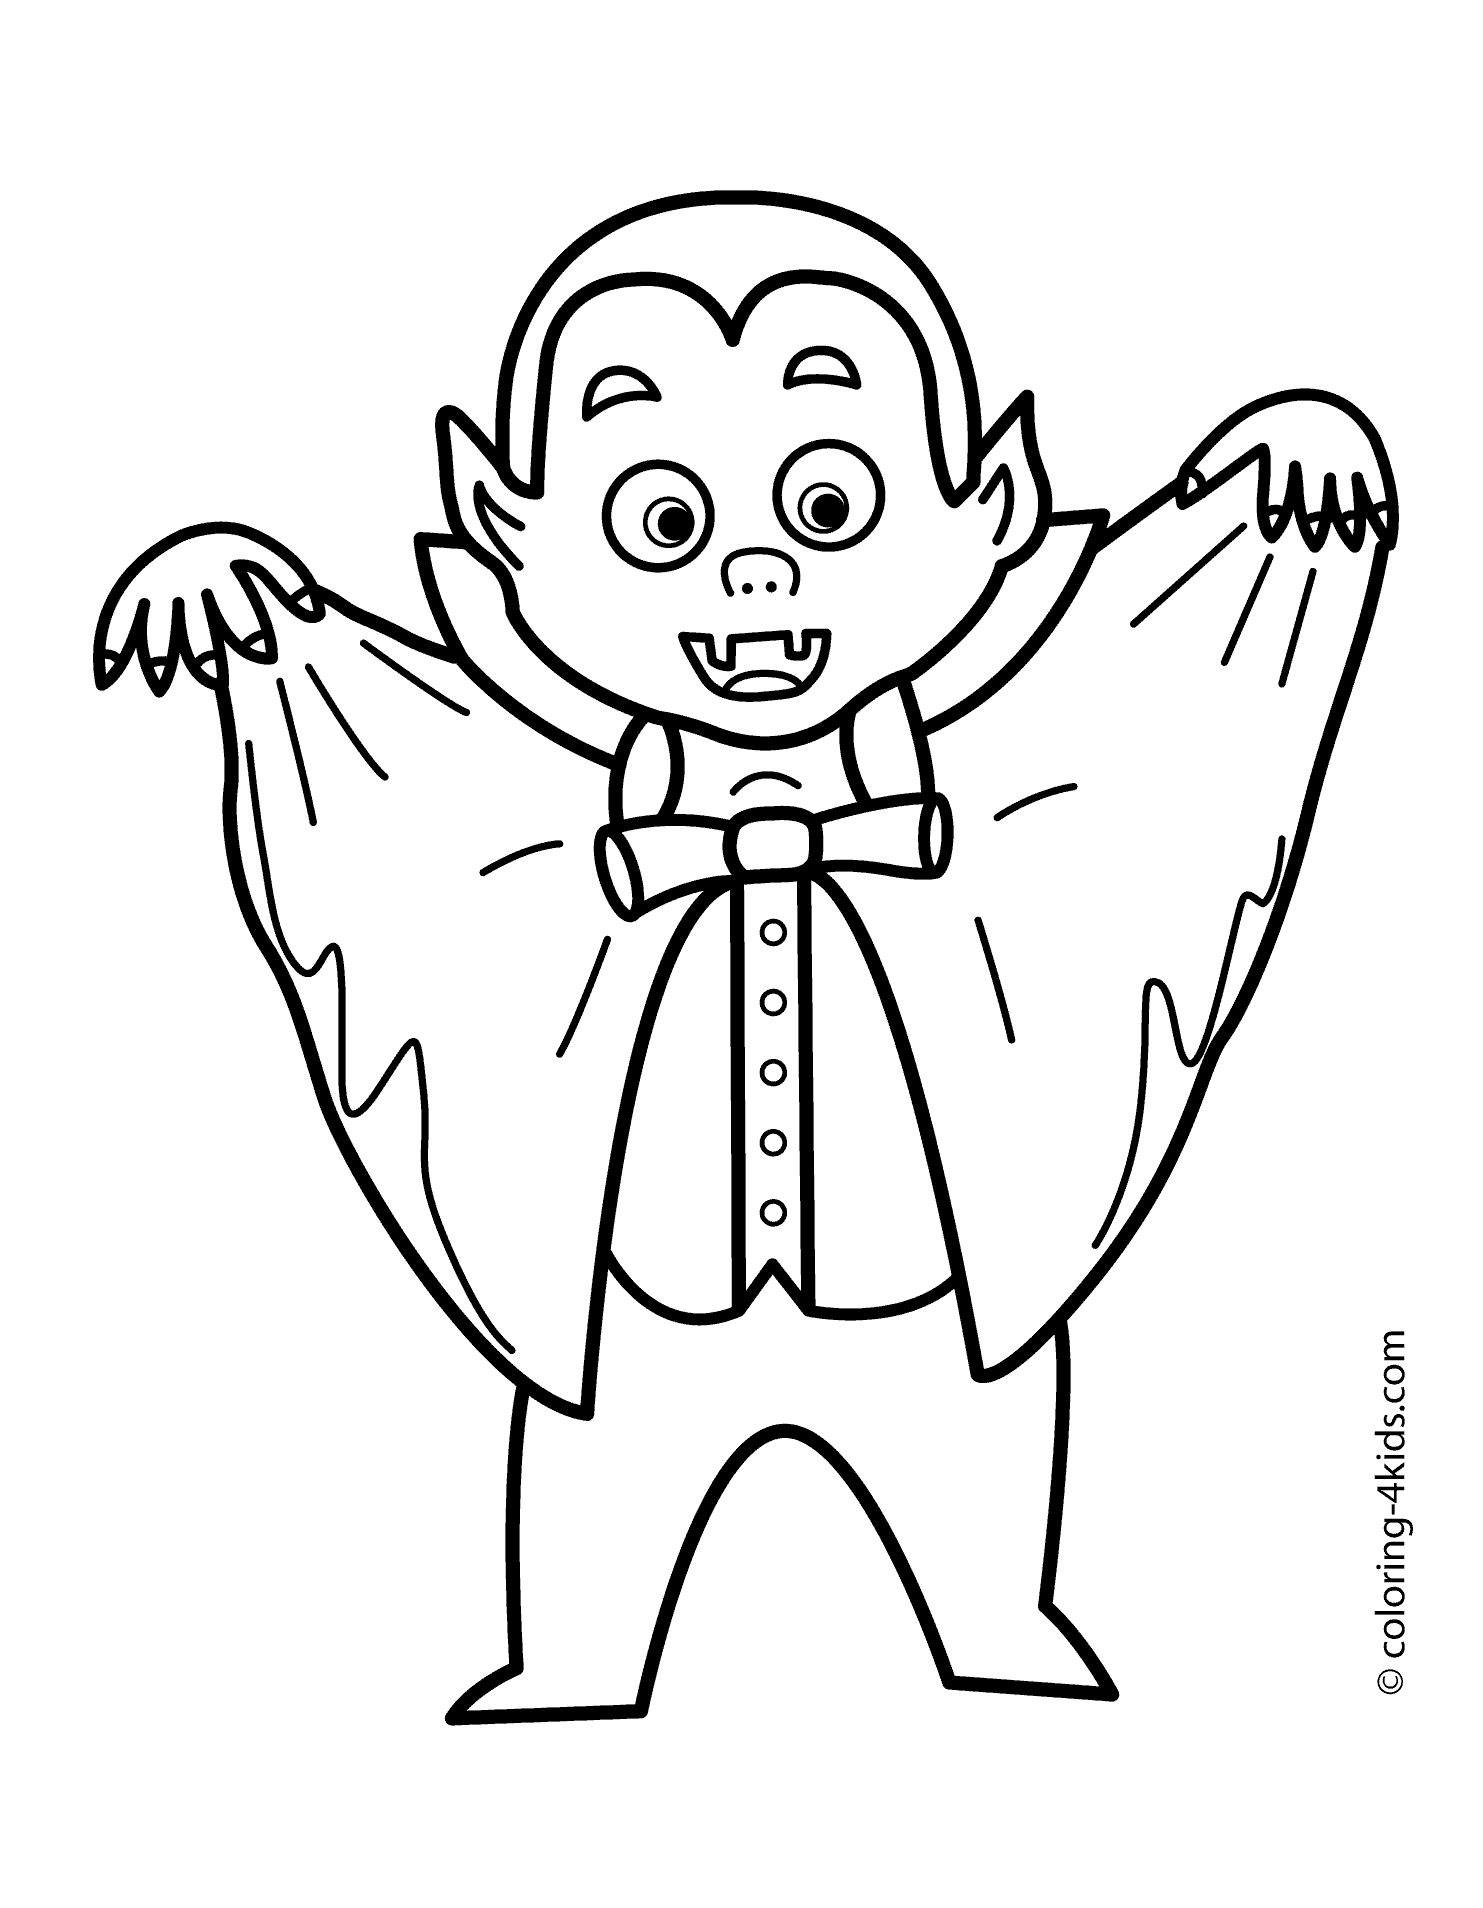 Halloween vampire coloring pages for kids printable free halloween coloring pages halloween coloring halloween coloring sheets